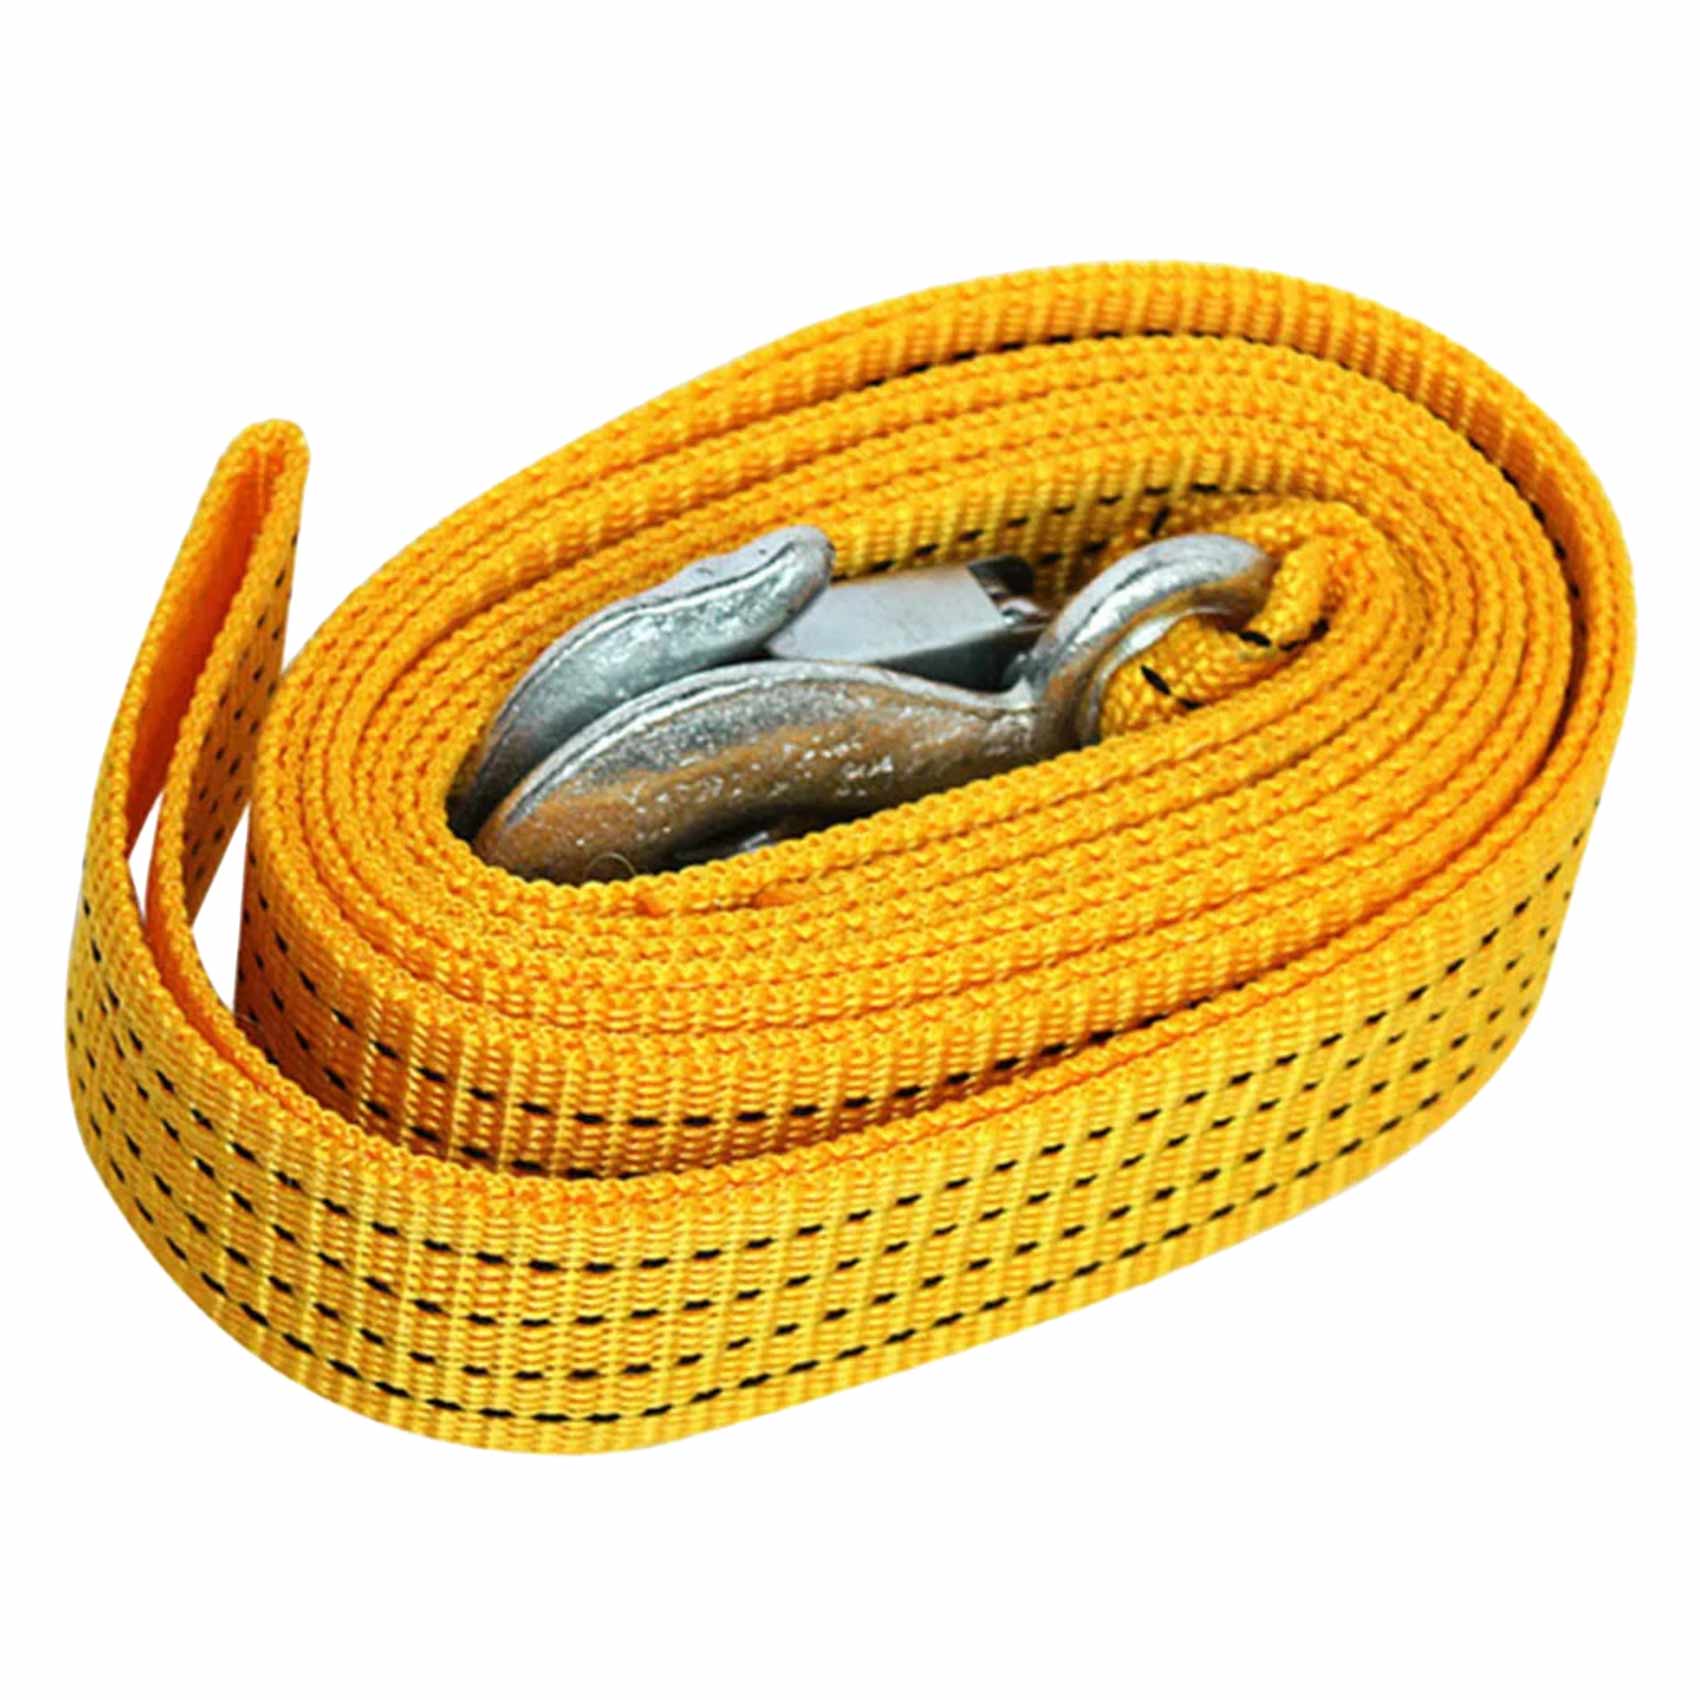 Buy Tow Rope Online - Shop on Carrefour Kenya